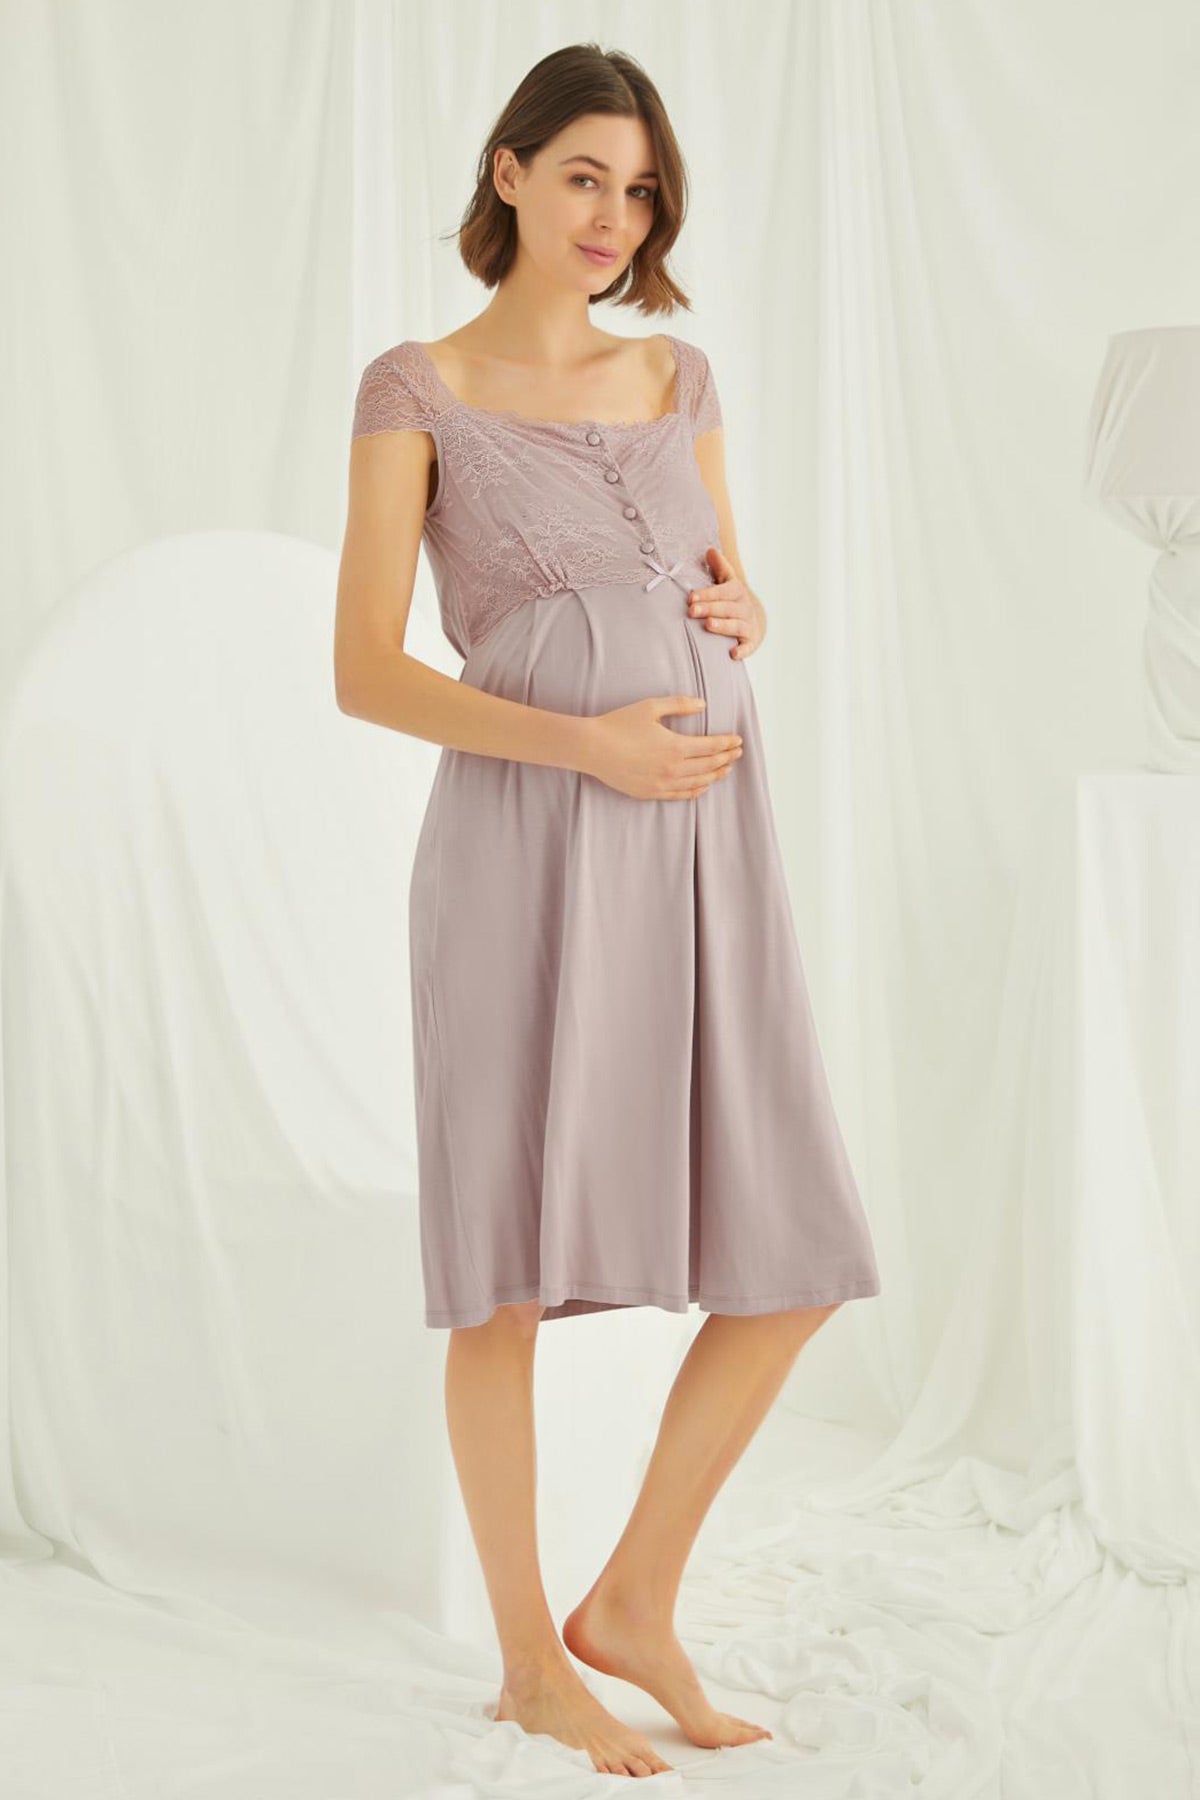 Shopymommy 18438 Lace Maternity & Nursing Nightgown With Robe Set Coffee